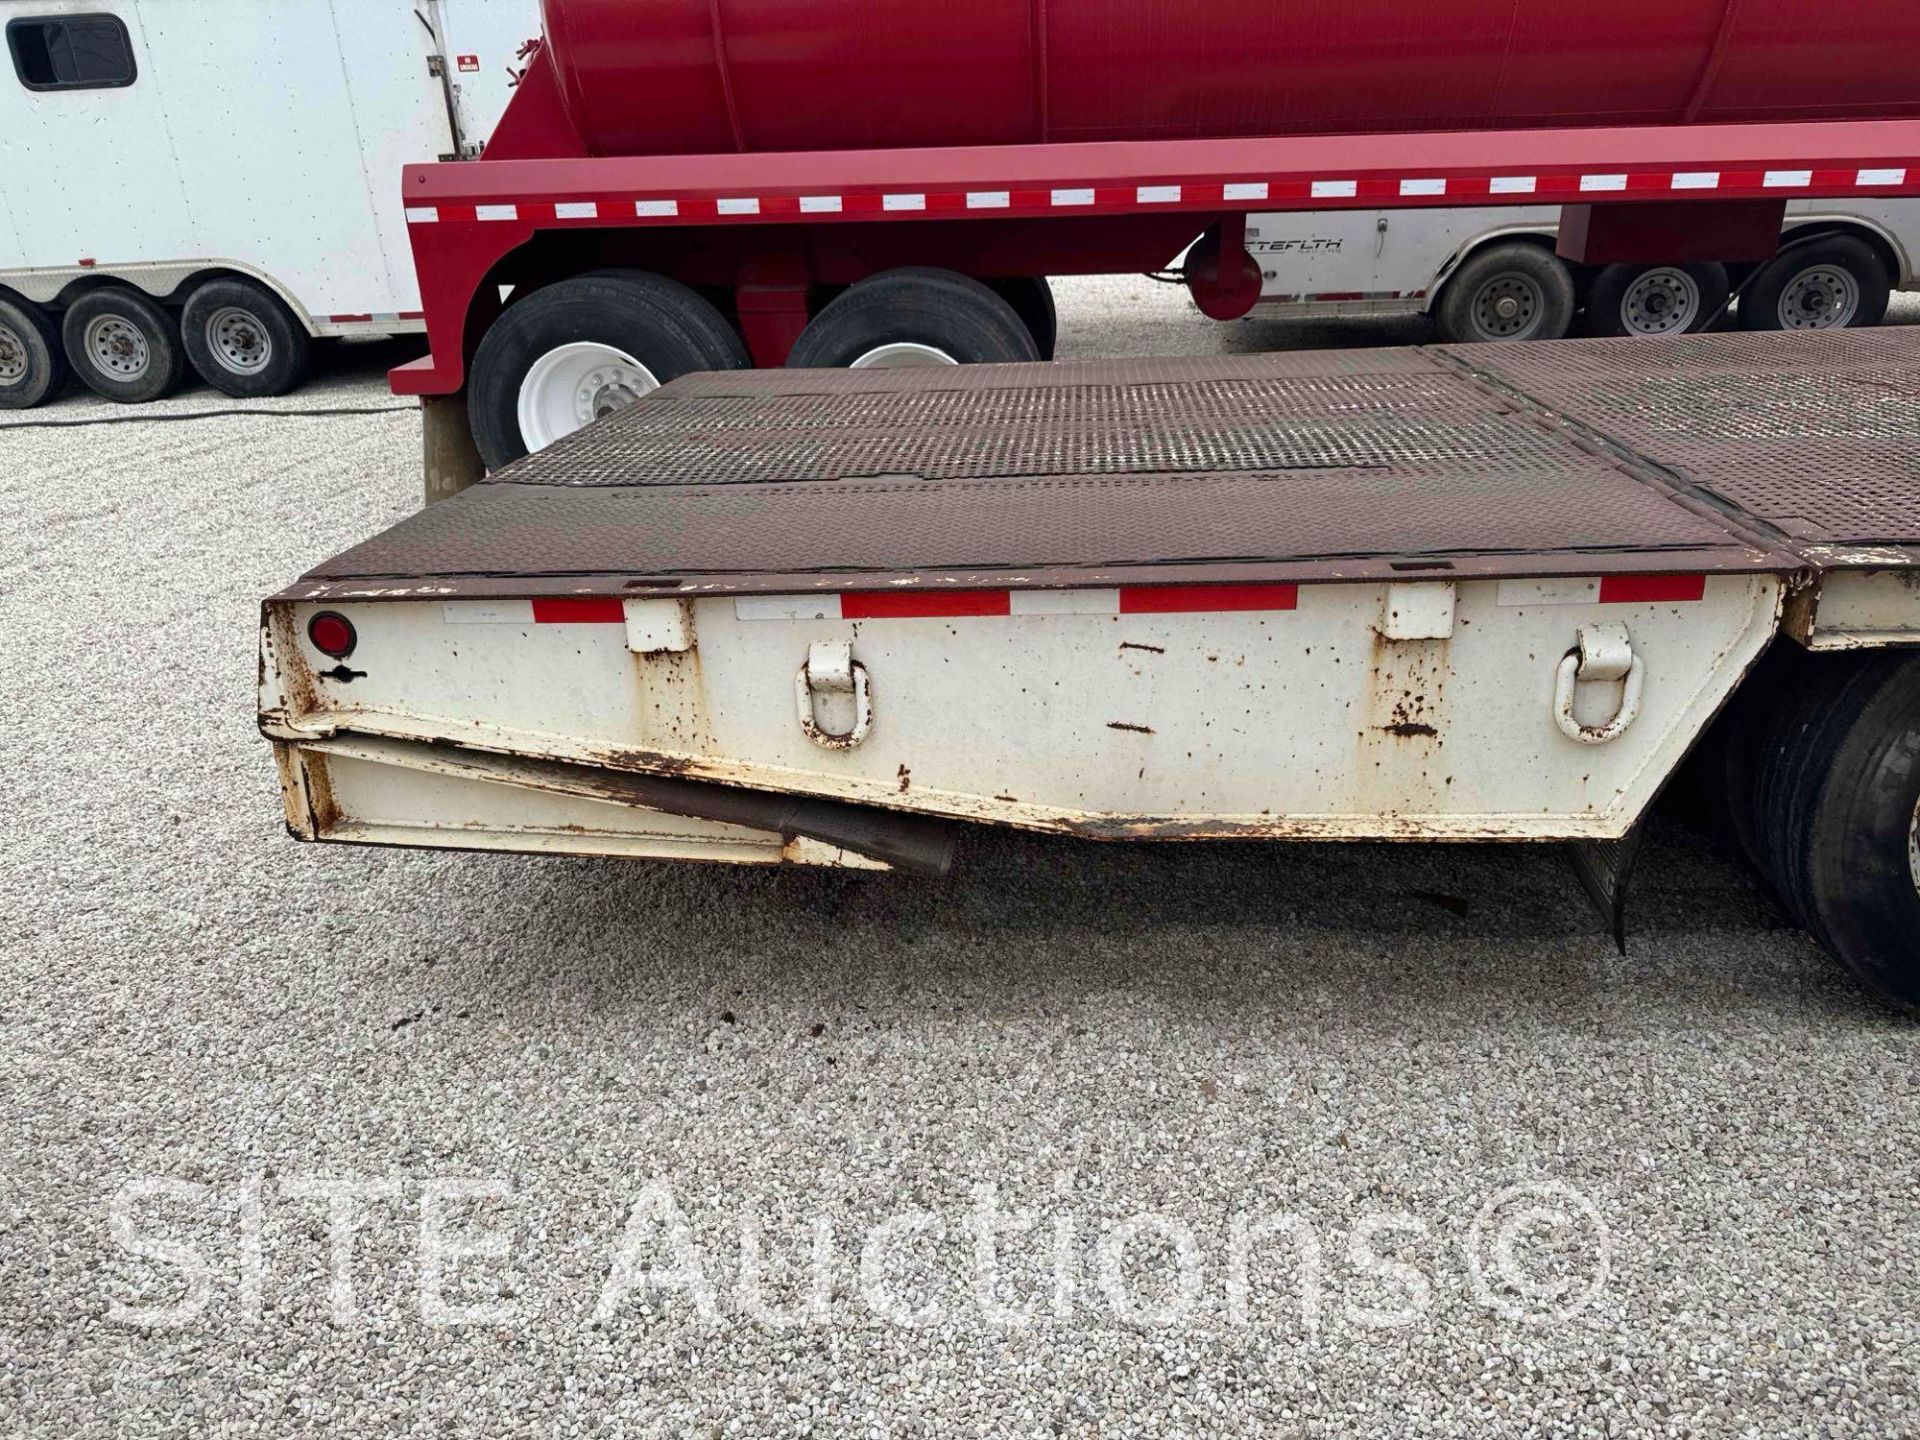 2003 Trail King TK70HT-482 T/A Hydraulic Tail Trailer - Image 5 of 15